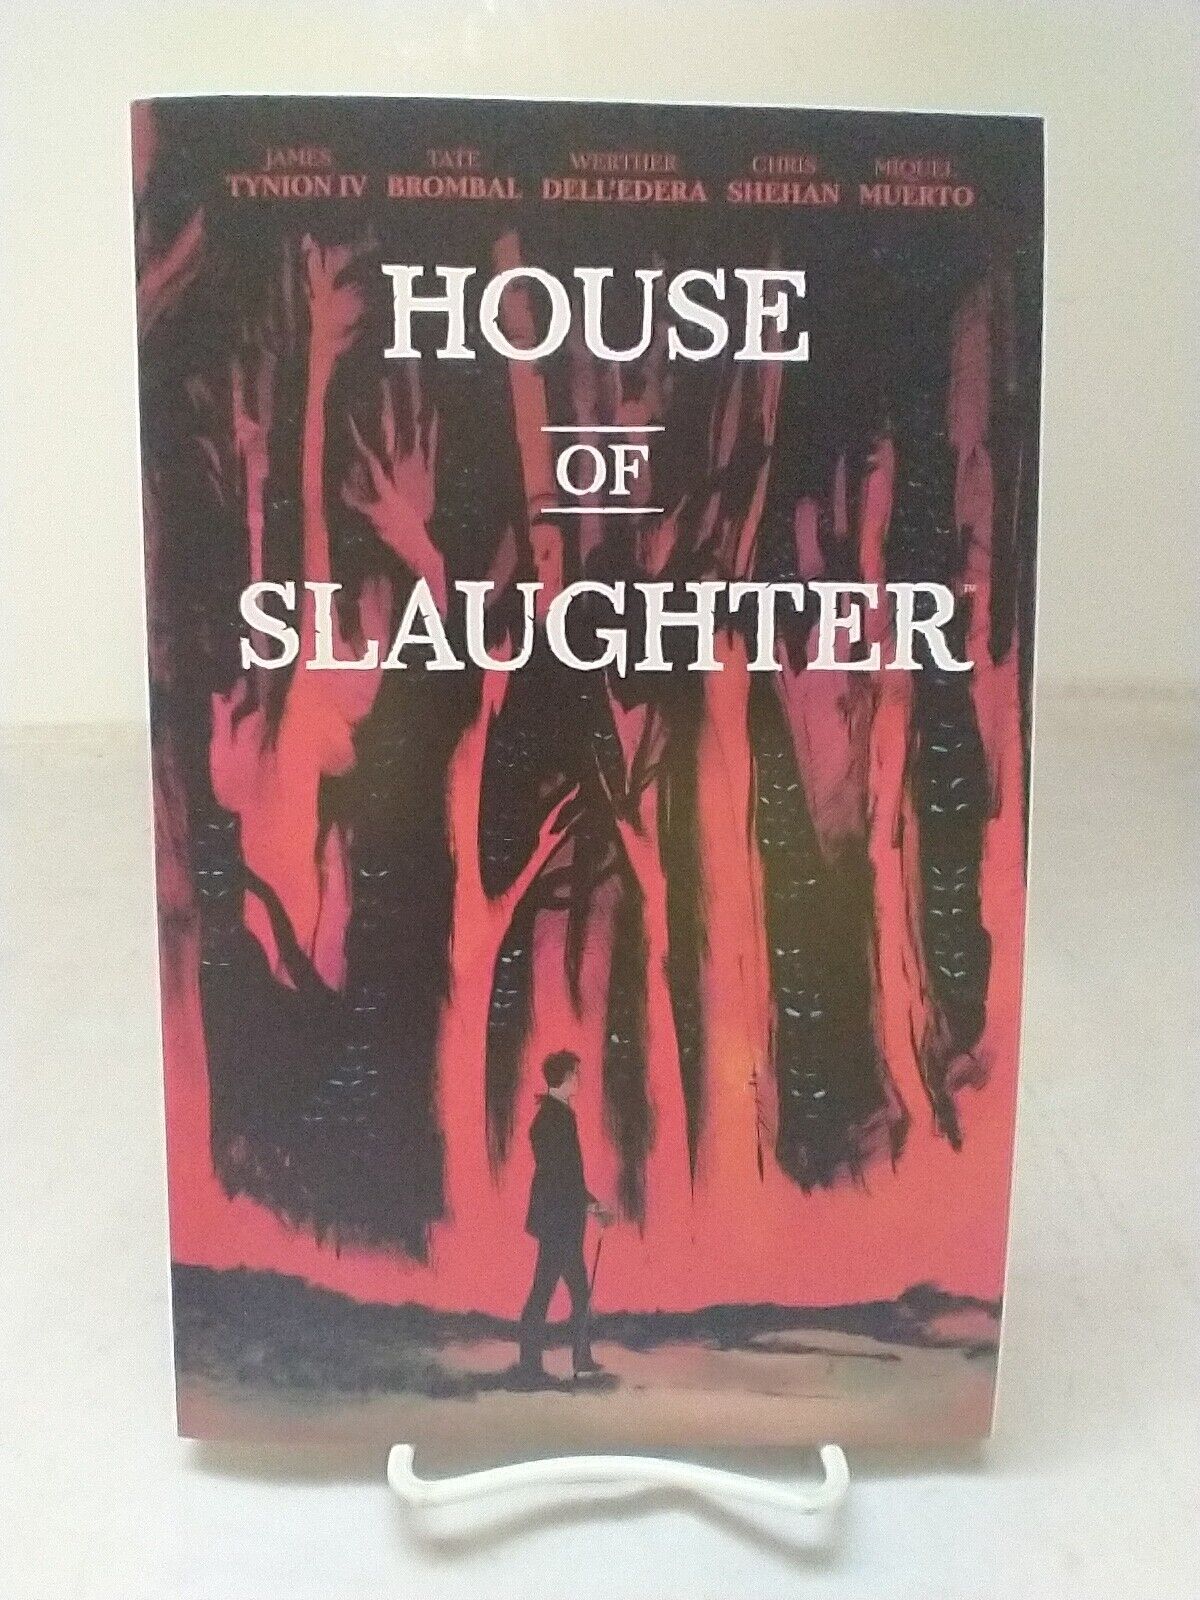 House of Slaughter Volume 1 Butcher\'s Mark Trade Paperback New James Tynion IV